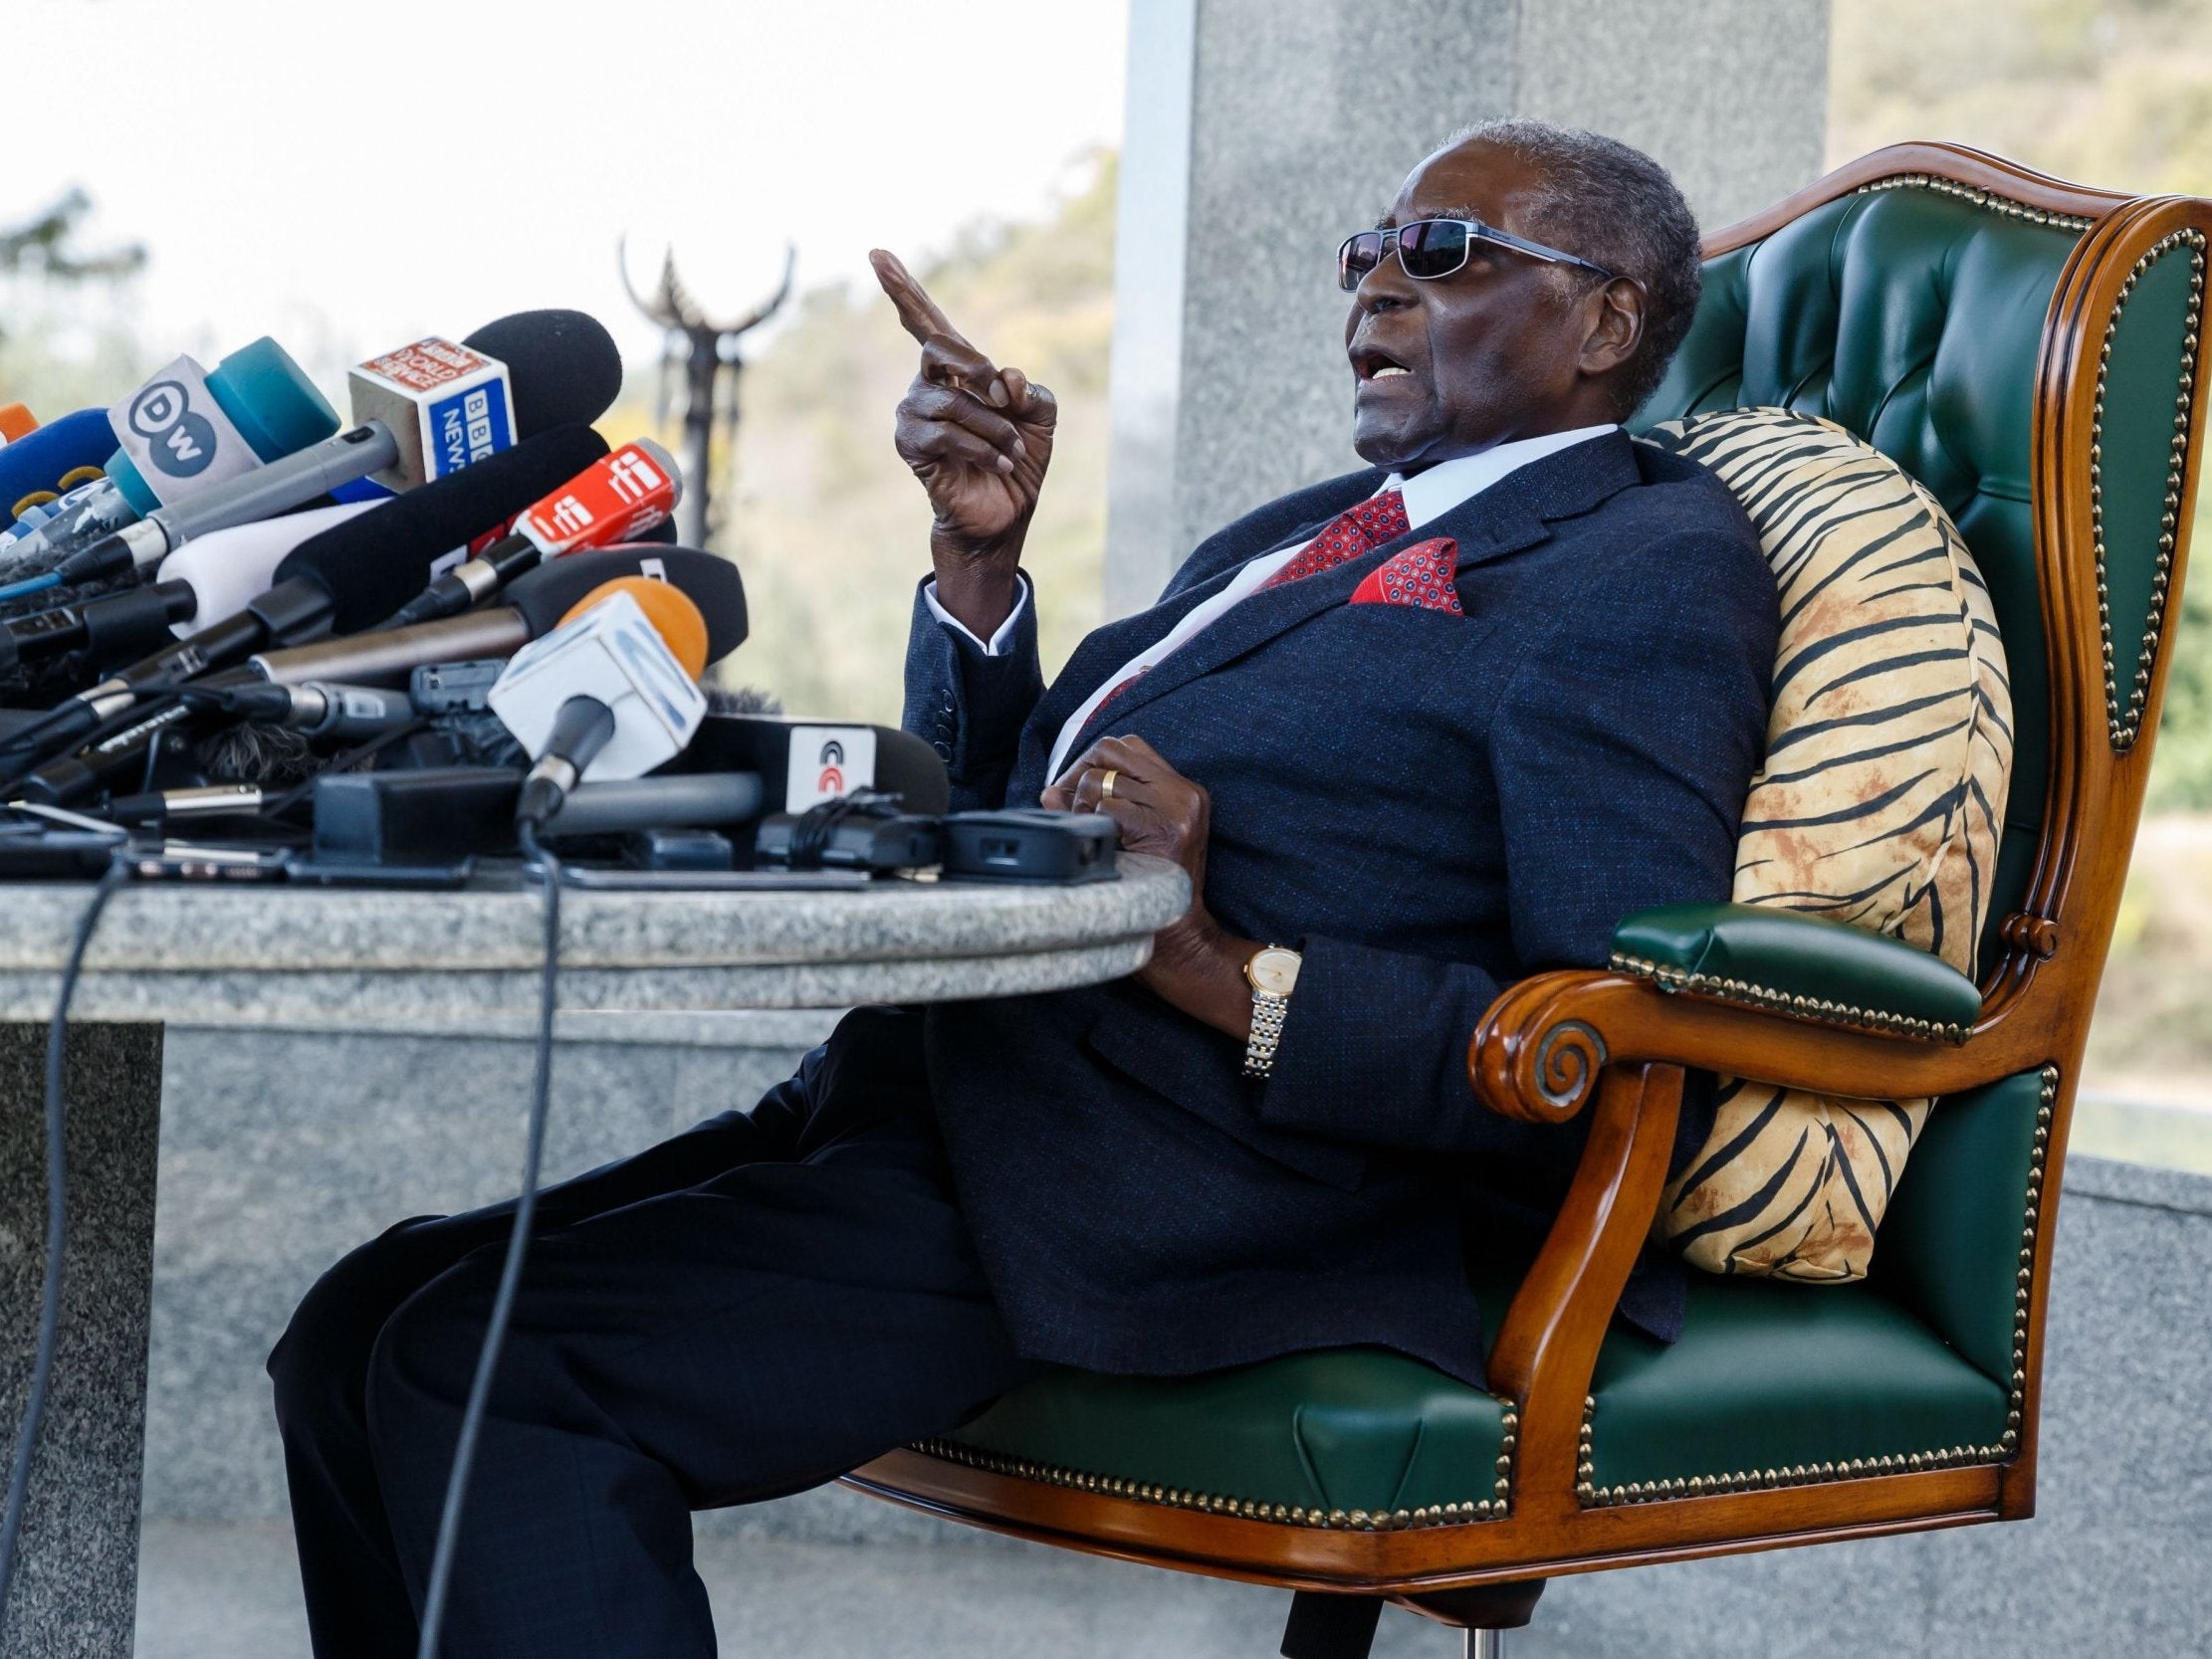 Mugabe speaks during a press conference held at his ‘Blue Roof’ residence in Harare